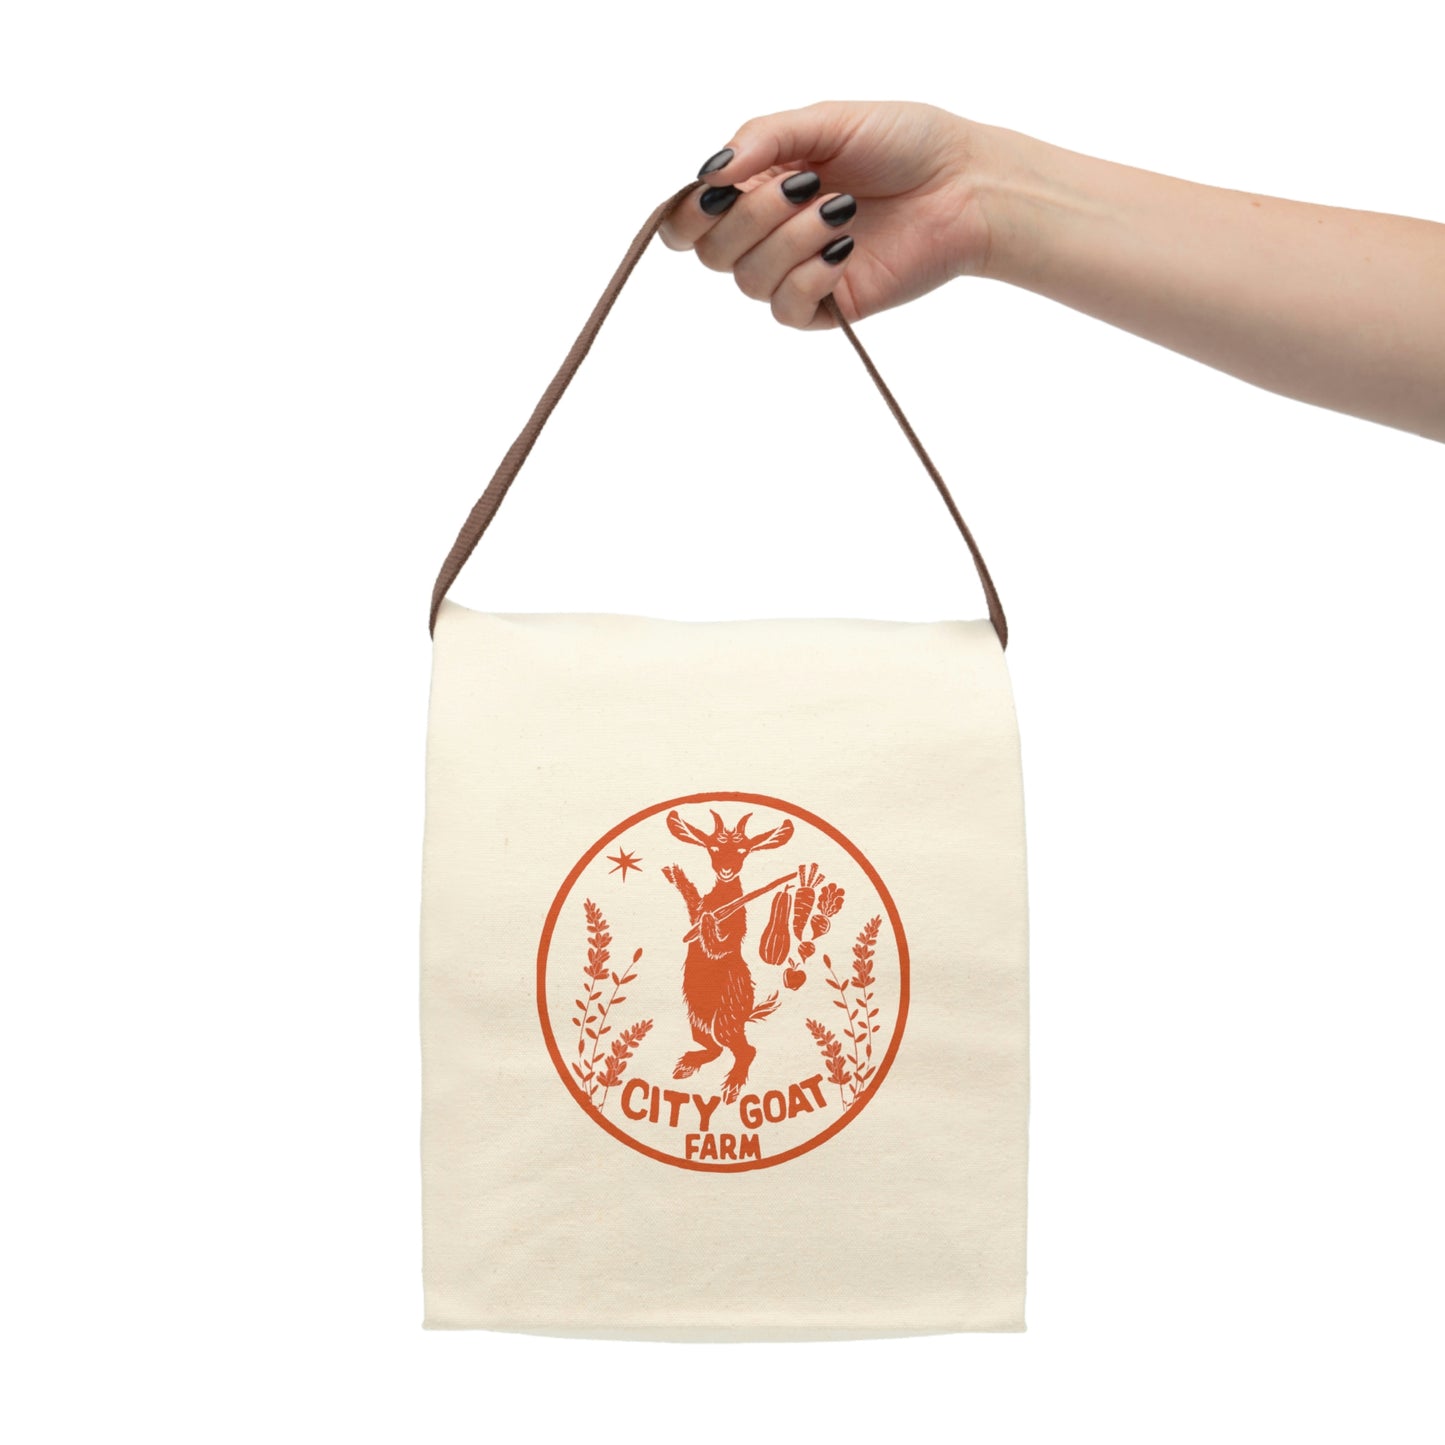 CITY GOAT FARM - GUIDING STAR - Canvas Lunch Bag With Strap